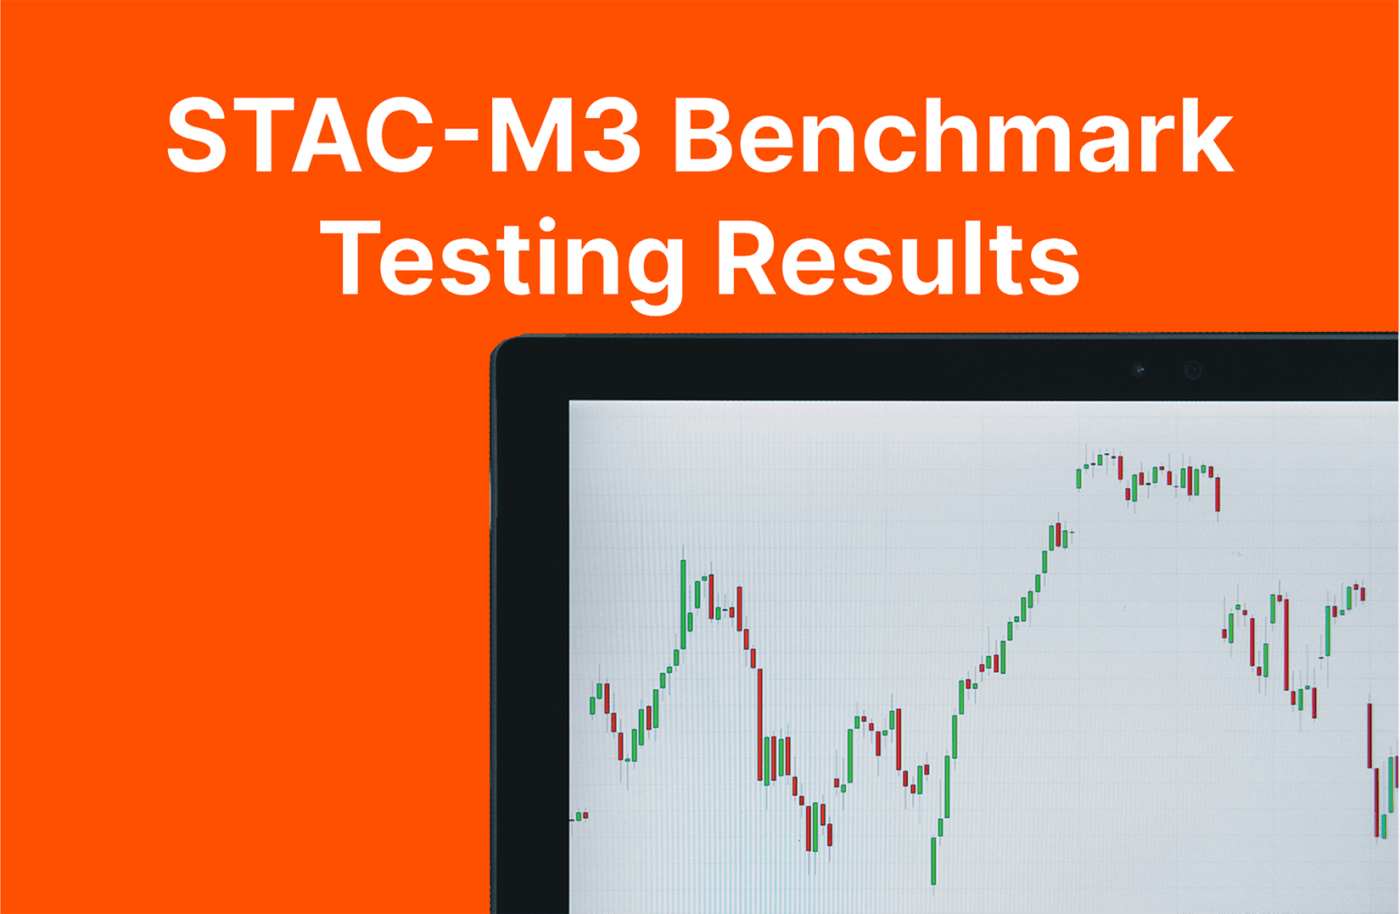 STAC-M3 Benchmark Testing Results